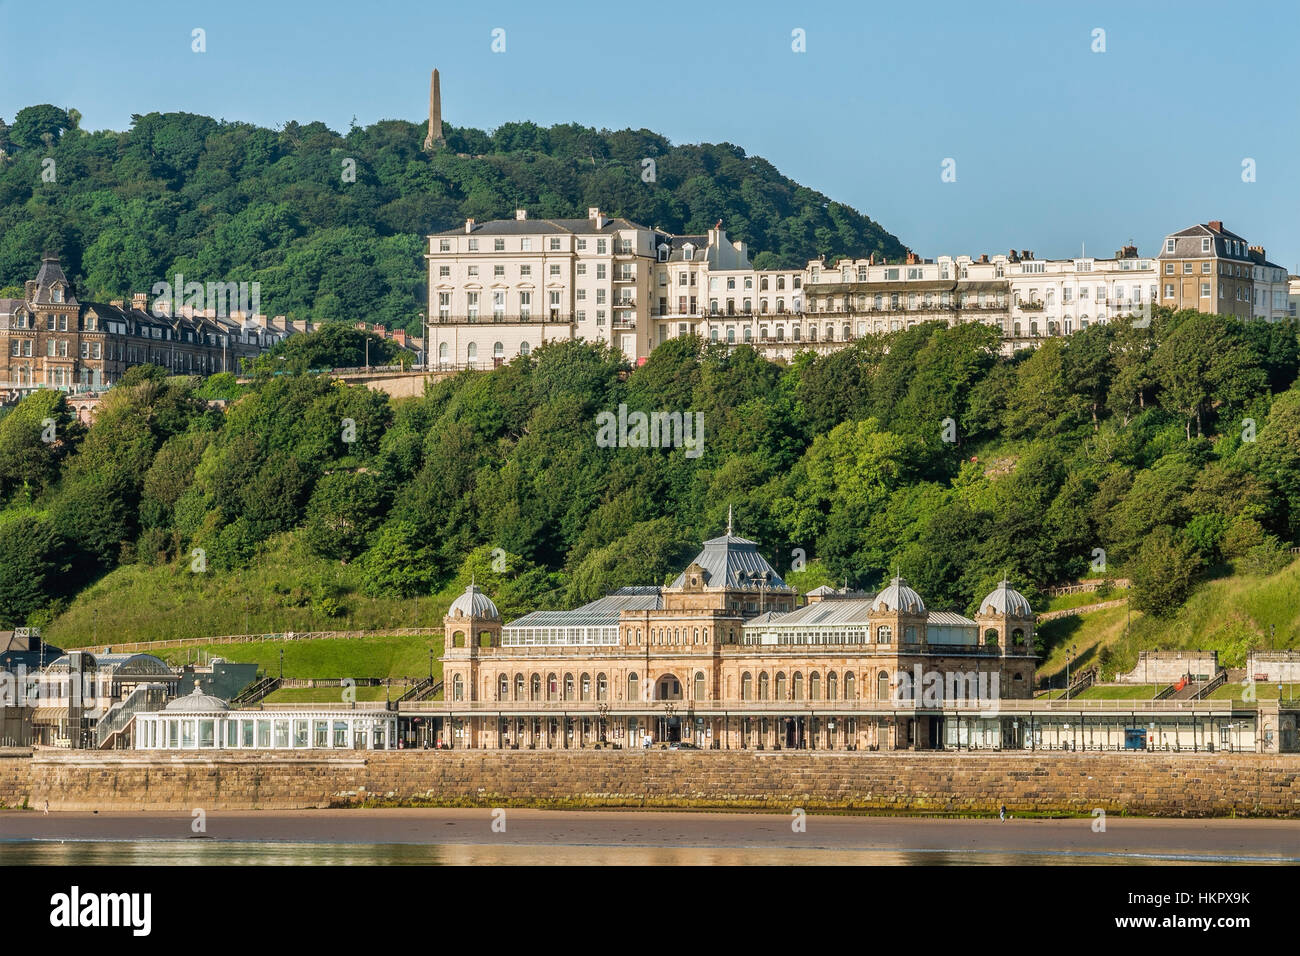 'The Spa', Scarborough known officially as the Scarborough Spa Complex is located in Scarborough’s South Bay, England Stock Photo